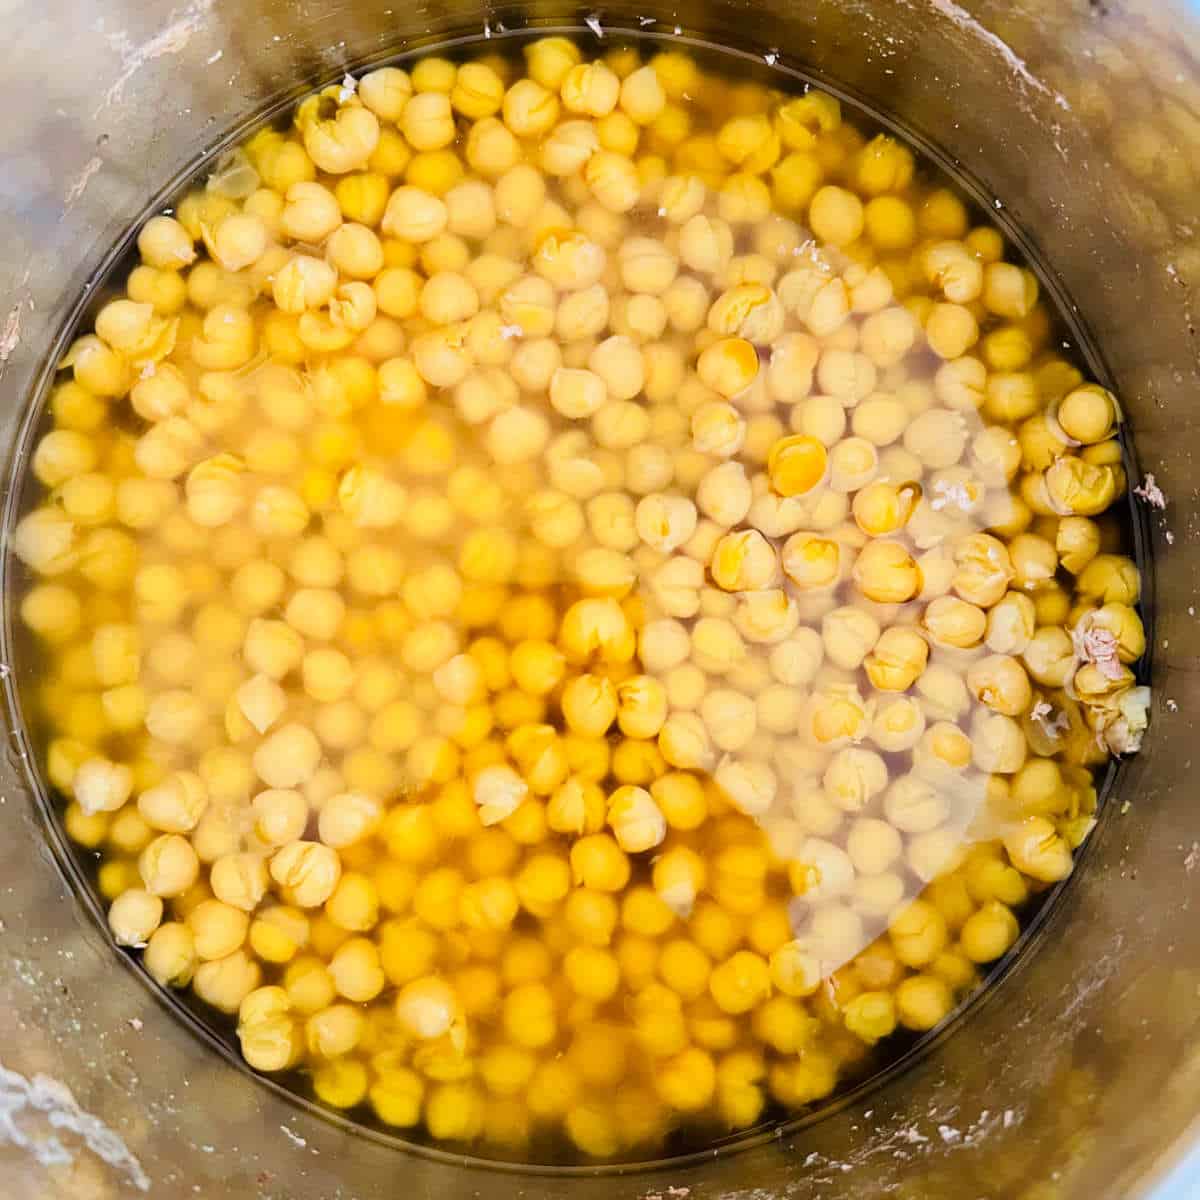 Boiled chickpeas in the Instant Pot.